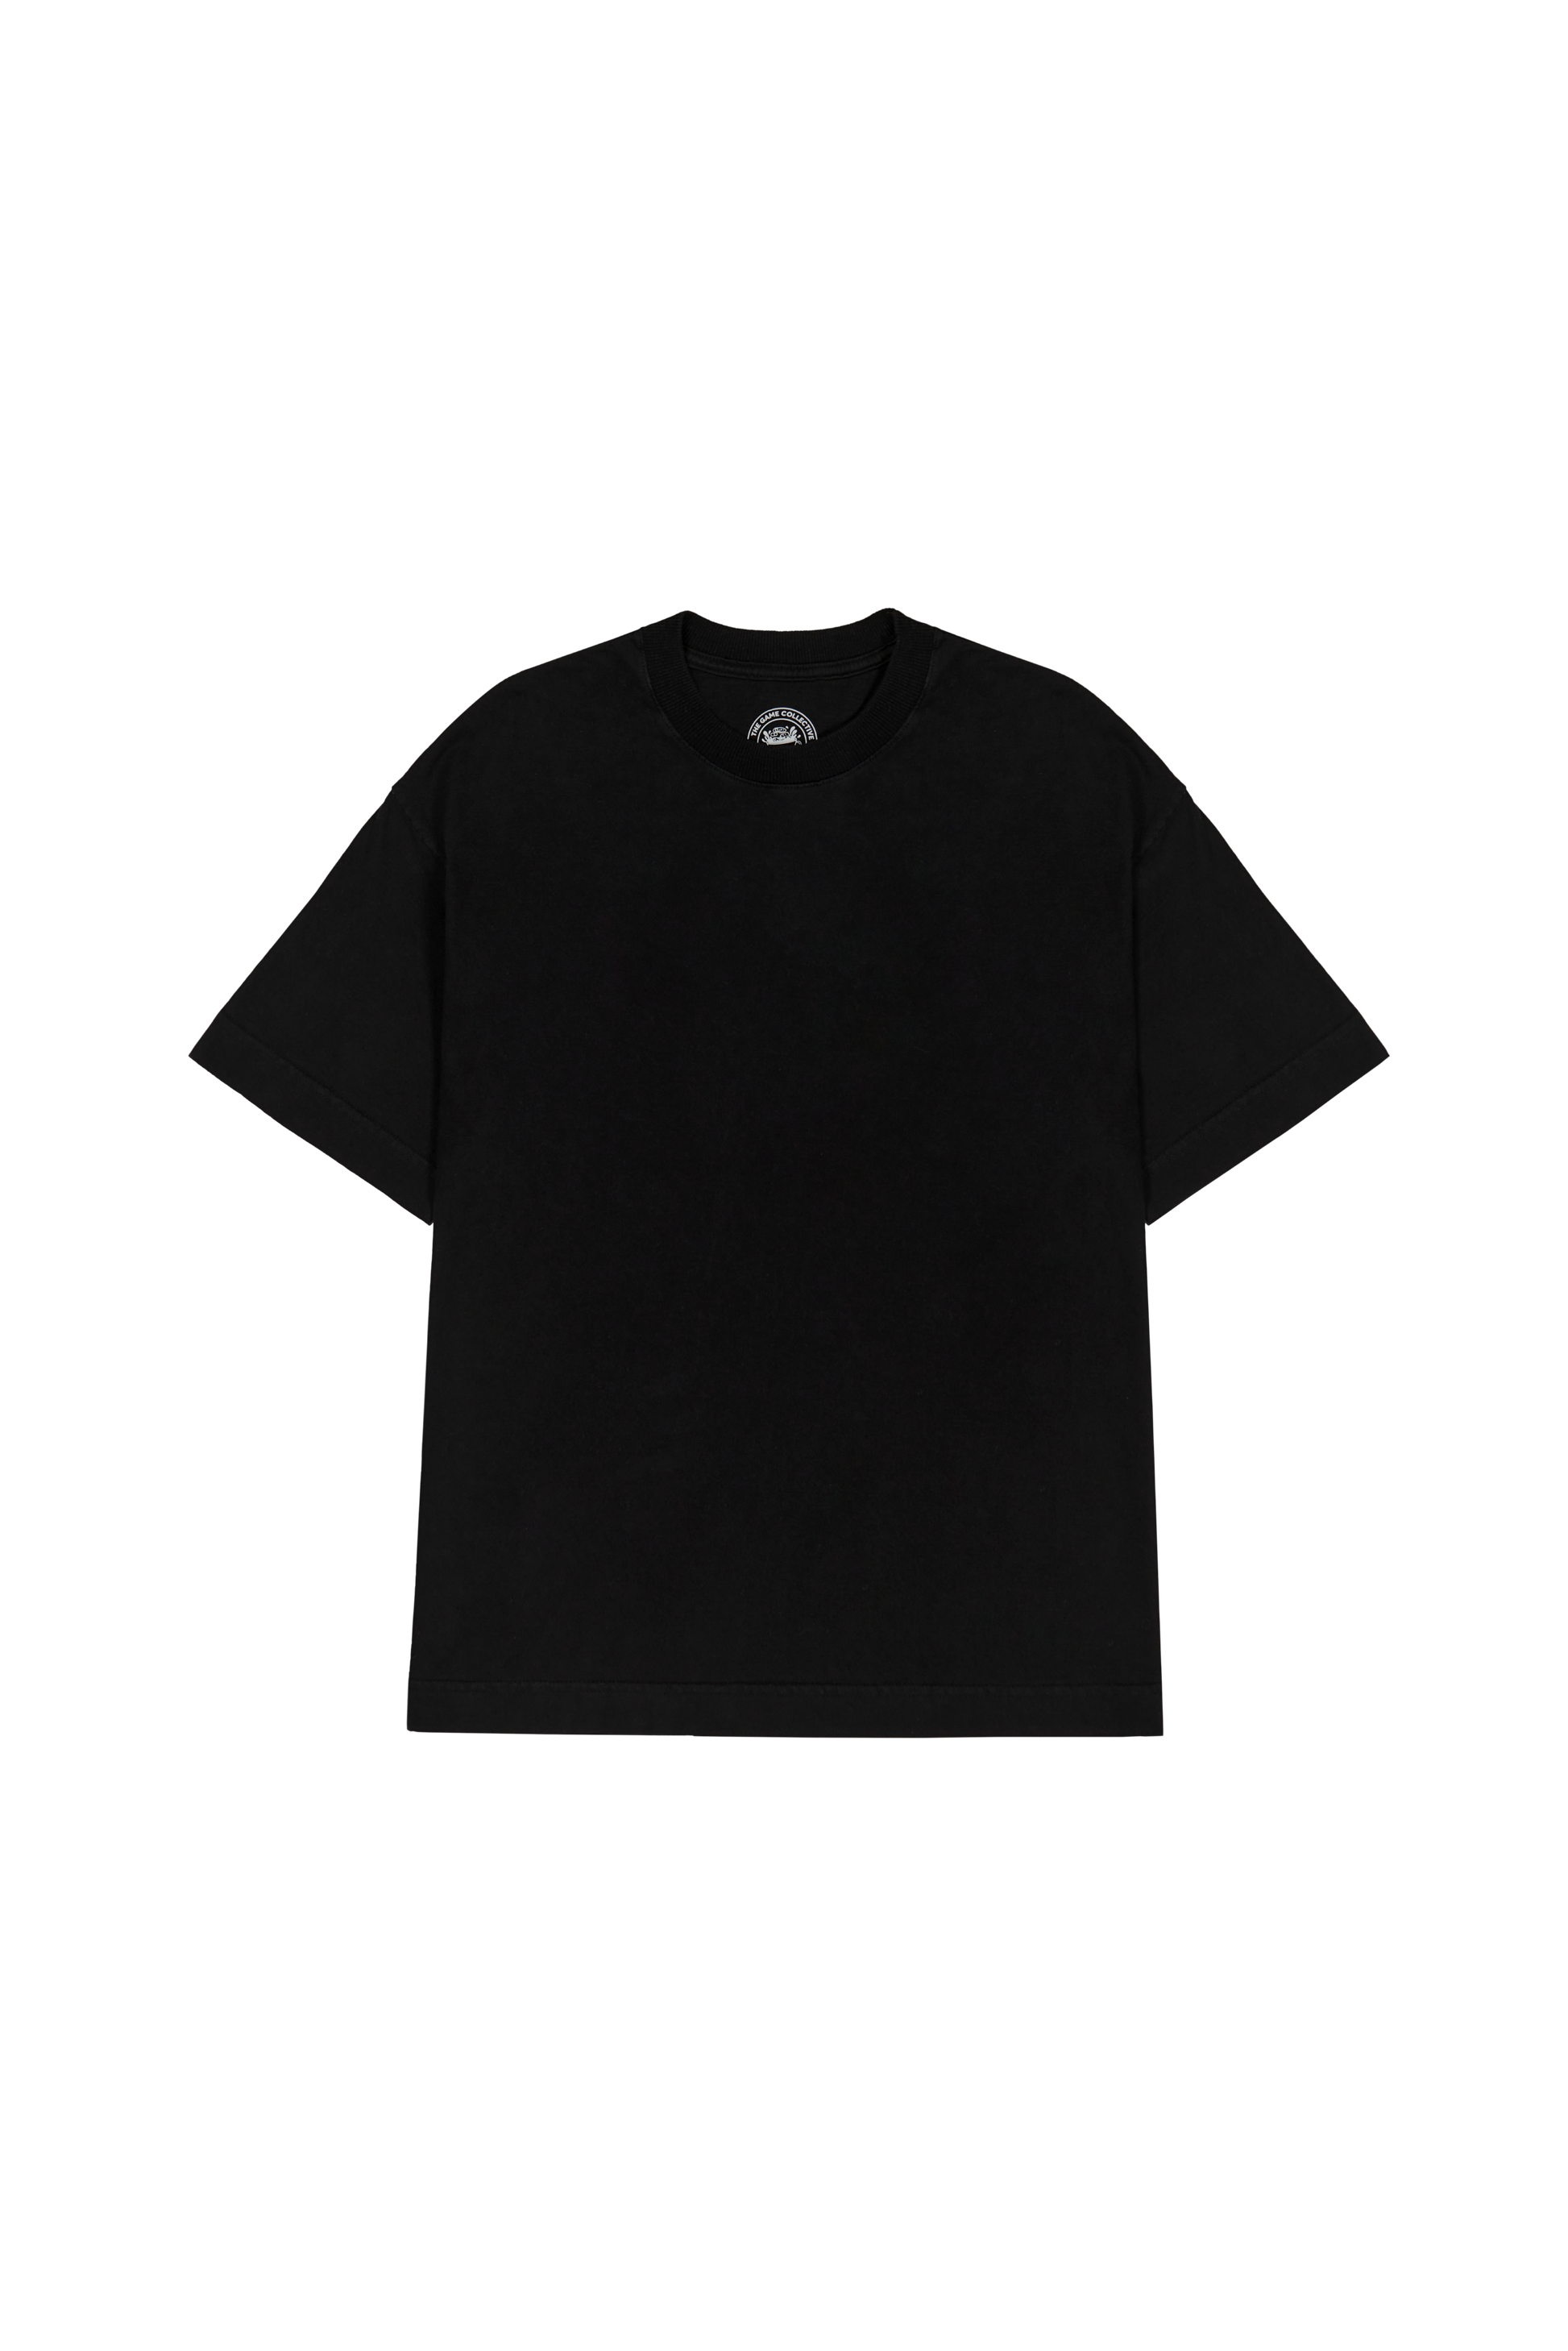 THE GAME - Not That Basic Tee® "Black" - THE GAME